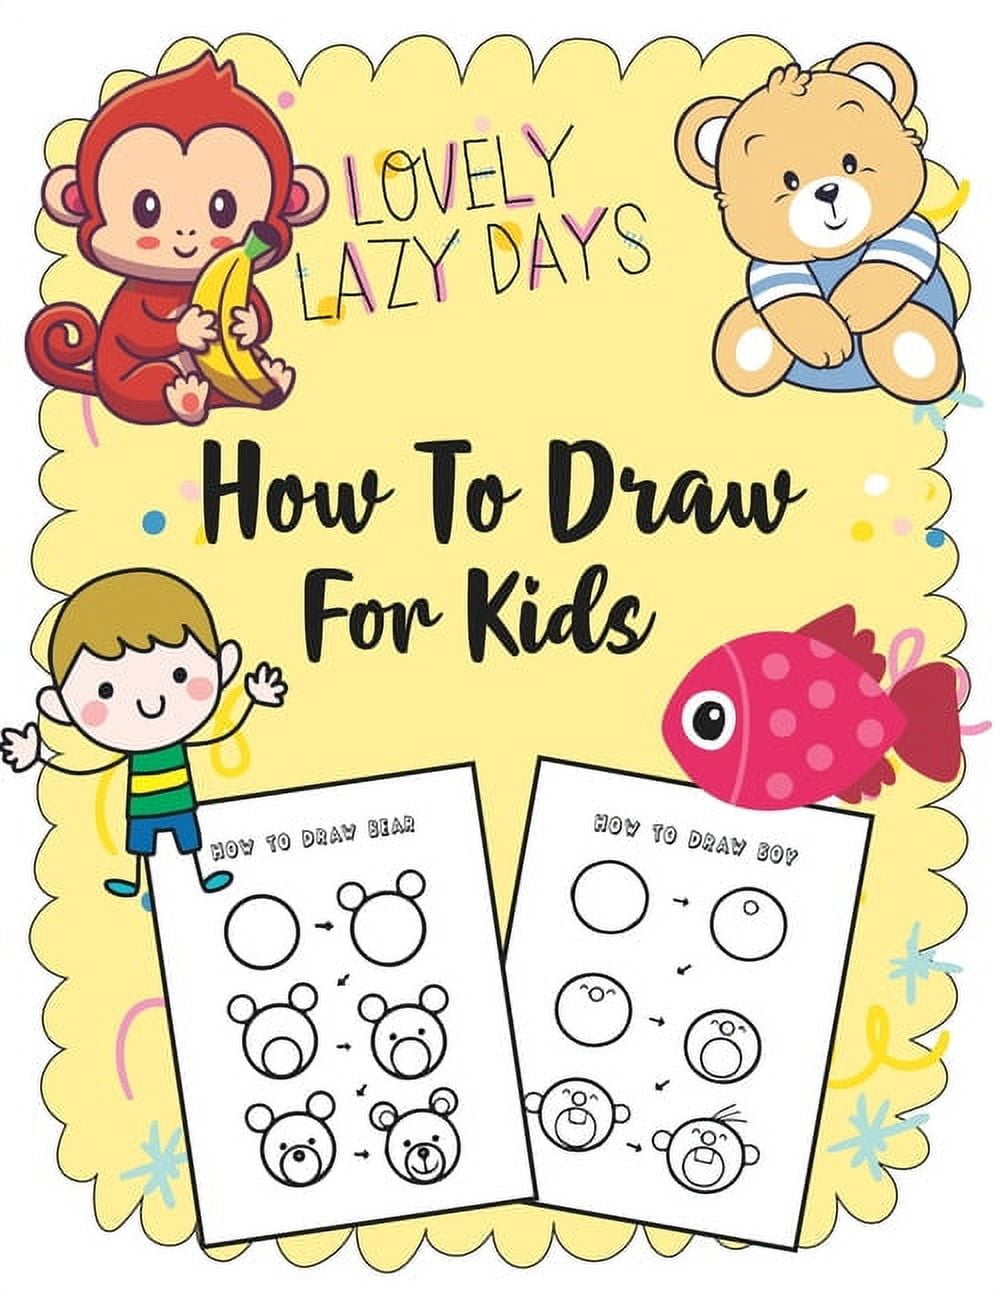 How to Draw for Kids: A Simple Step-by-Step Guide to Drawing Cute